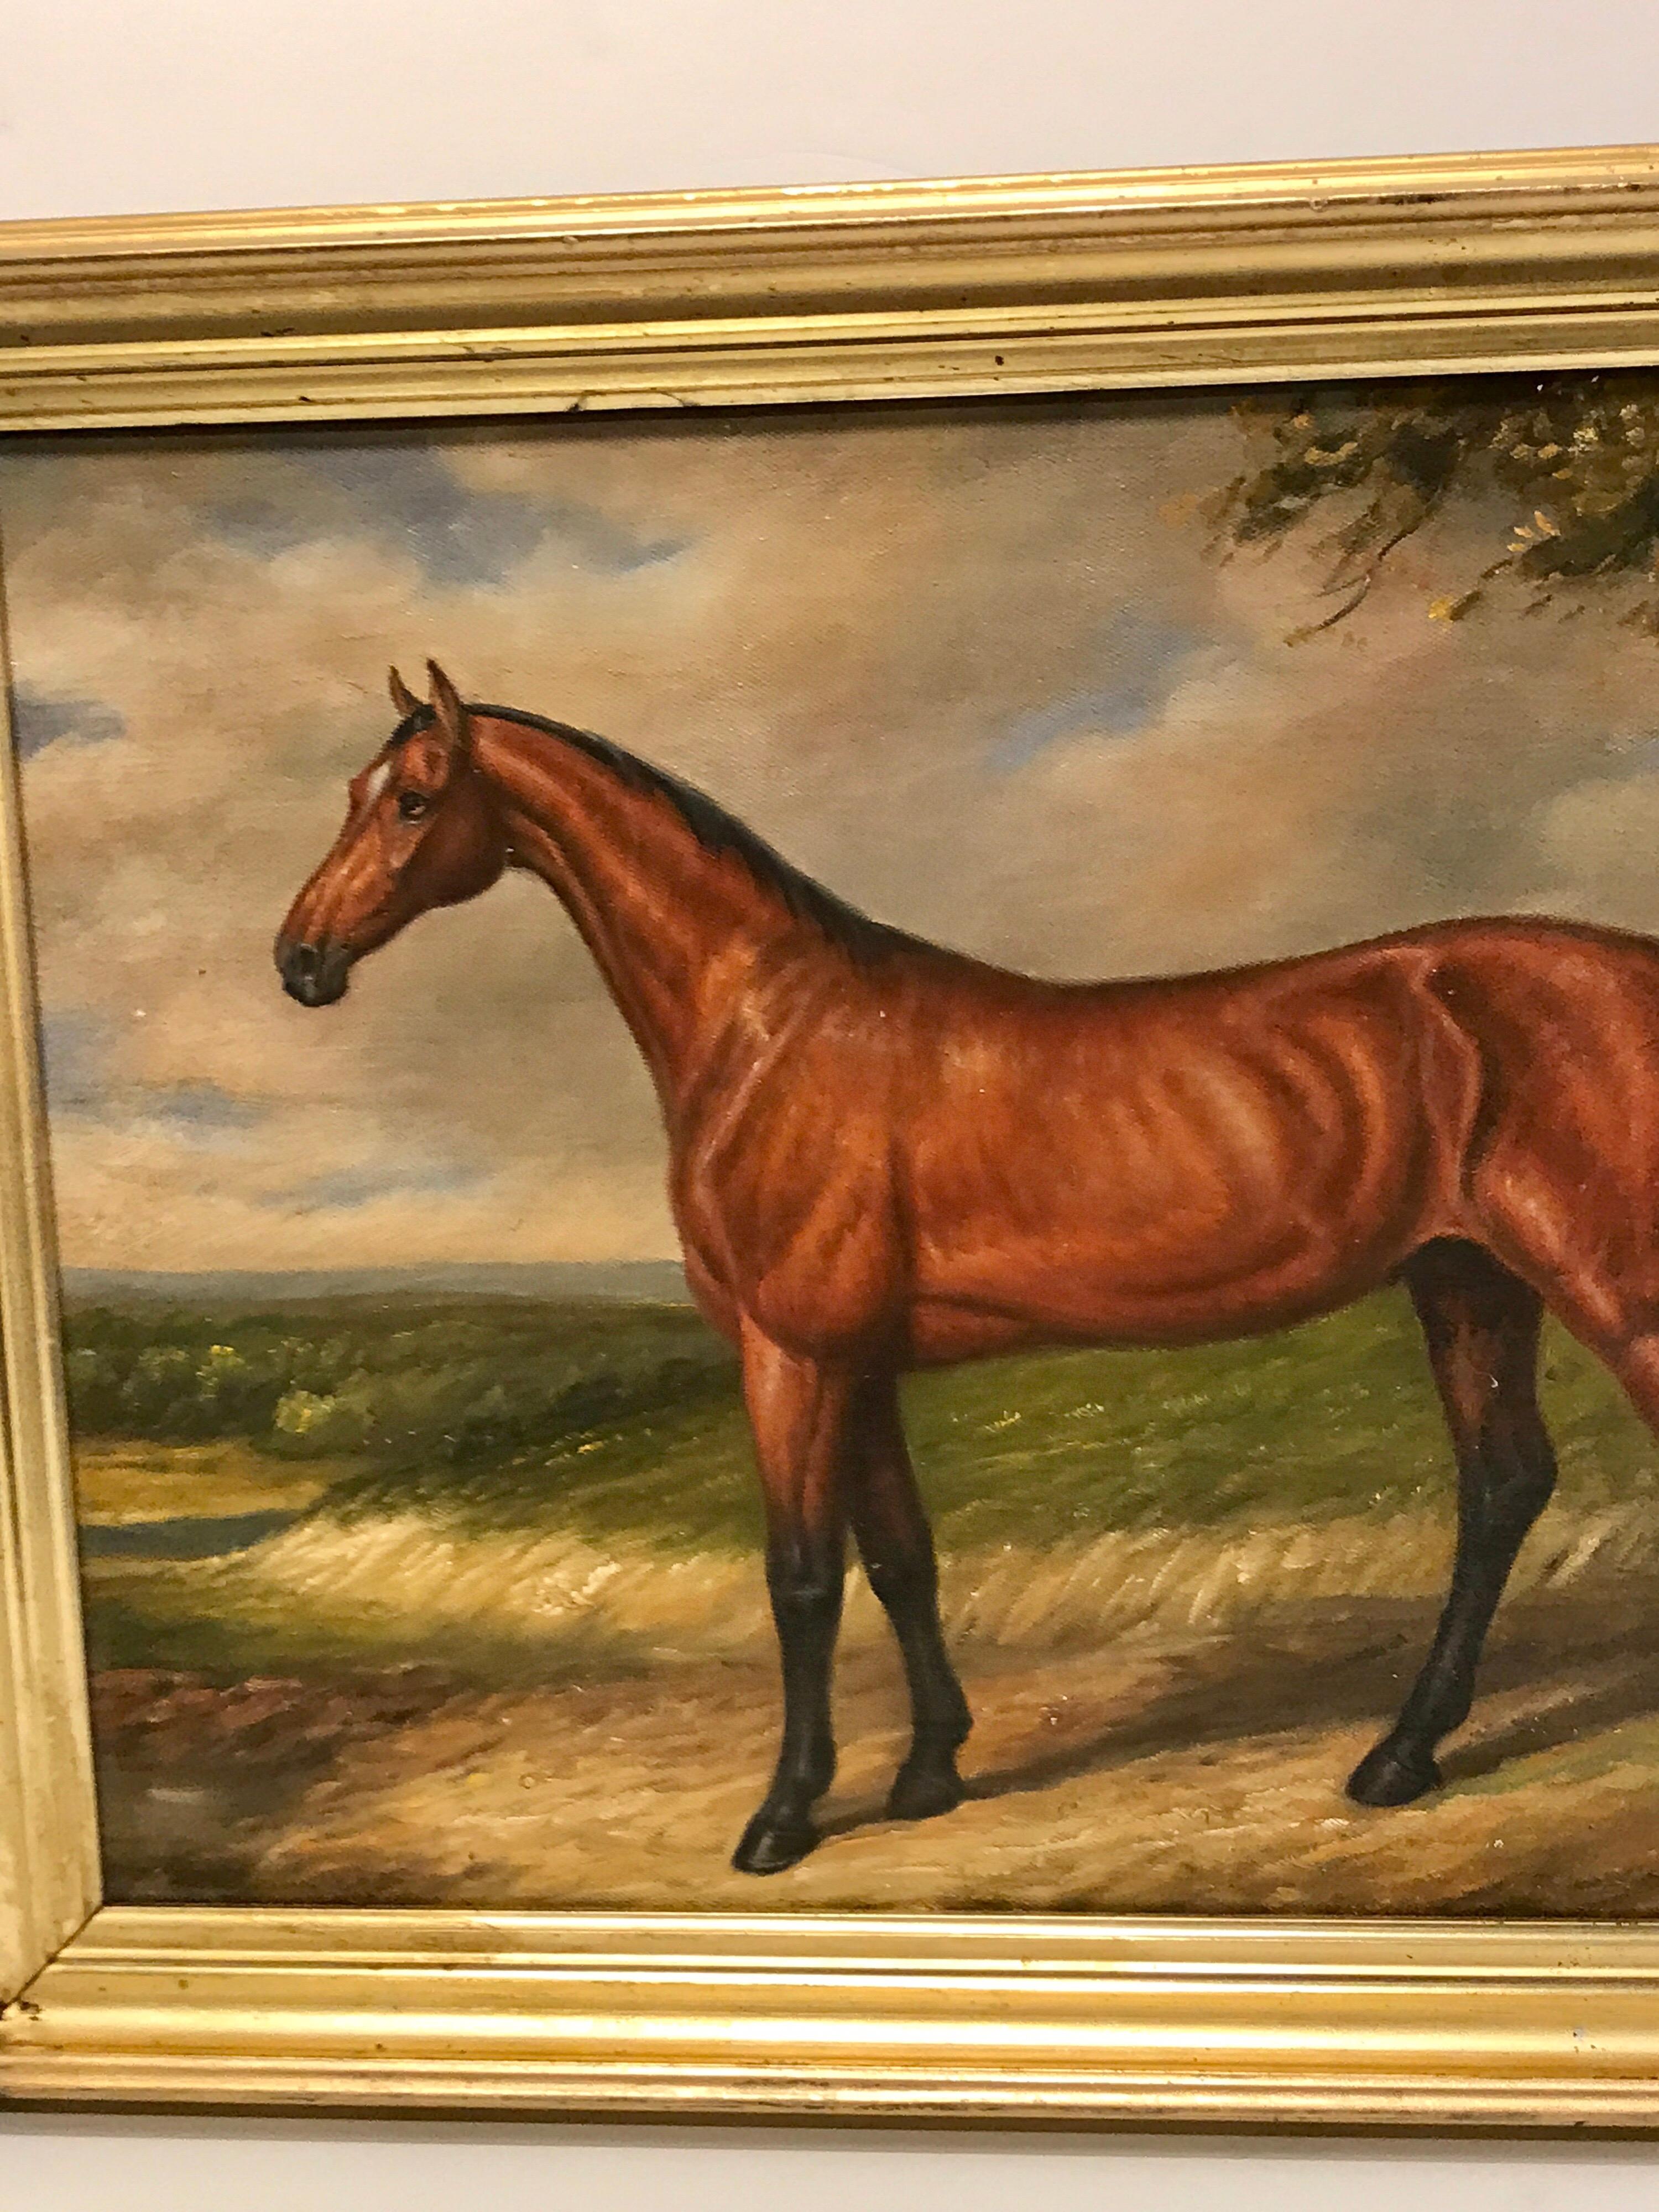 English portrait of a standing horse, well painted, unsigned.
Measures: 16